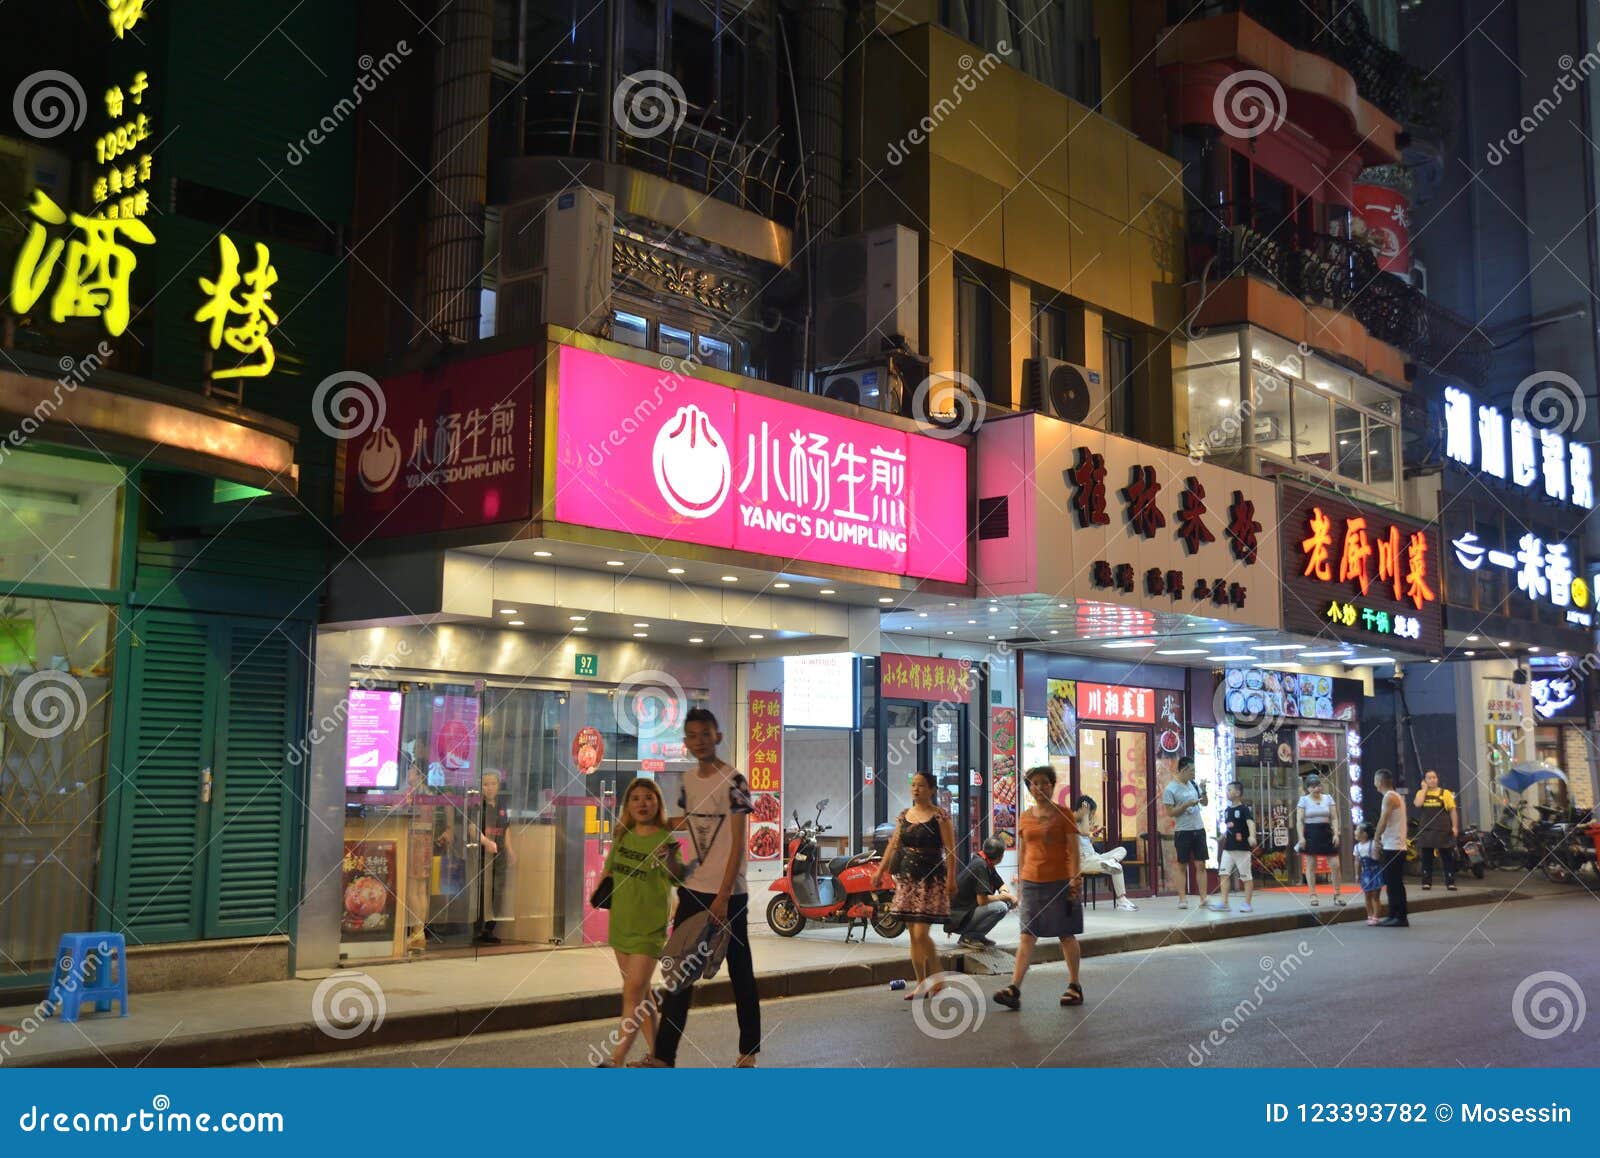 Shanghai Shop Signage Traffic Crowd City Editorial Photography Image Of Board Props